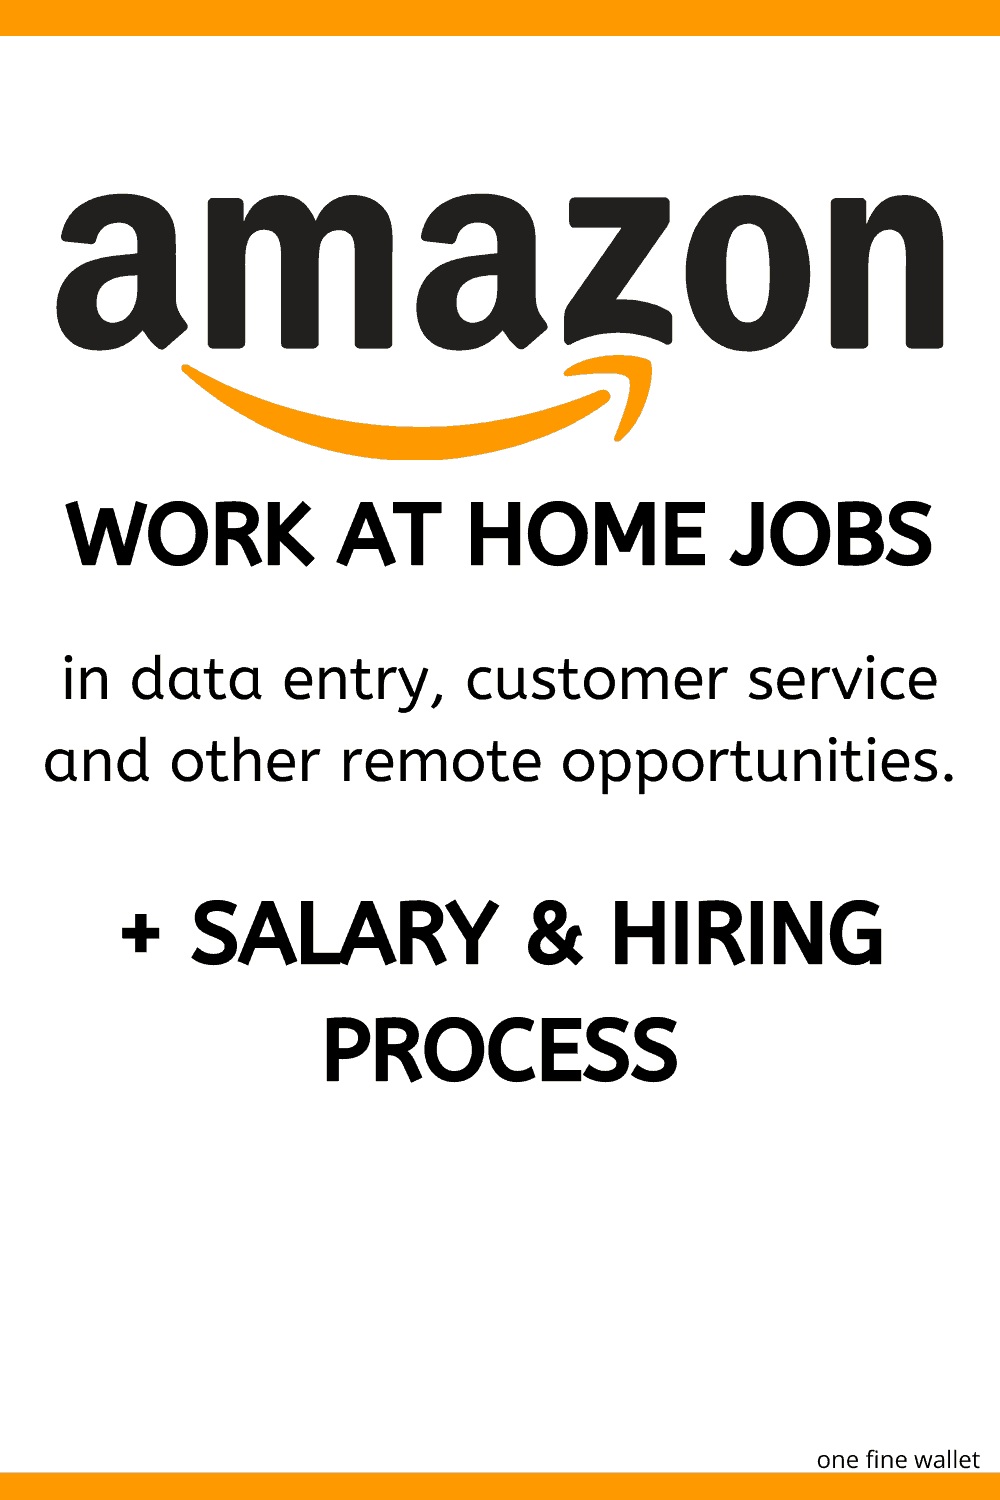 Amazon work from home jobs can give you the freedom to work from home with this big company. From data entry to customer service, there are many roles available.